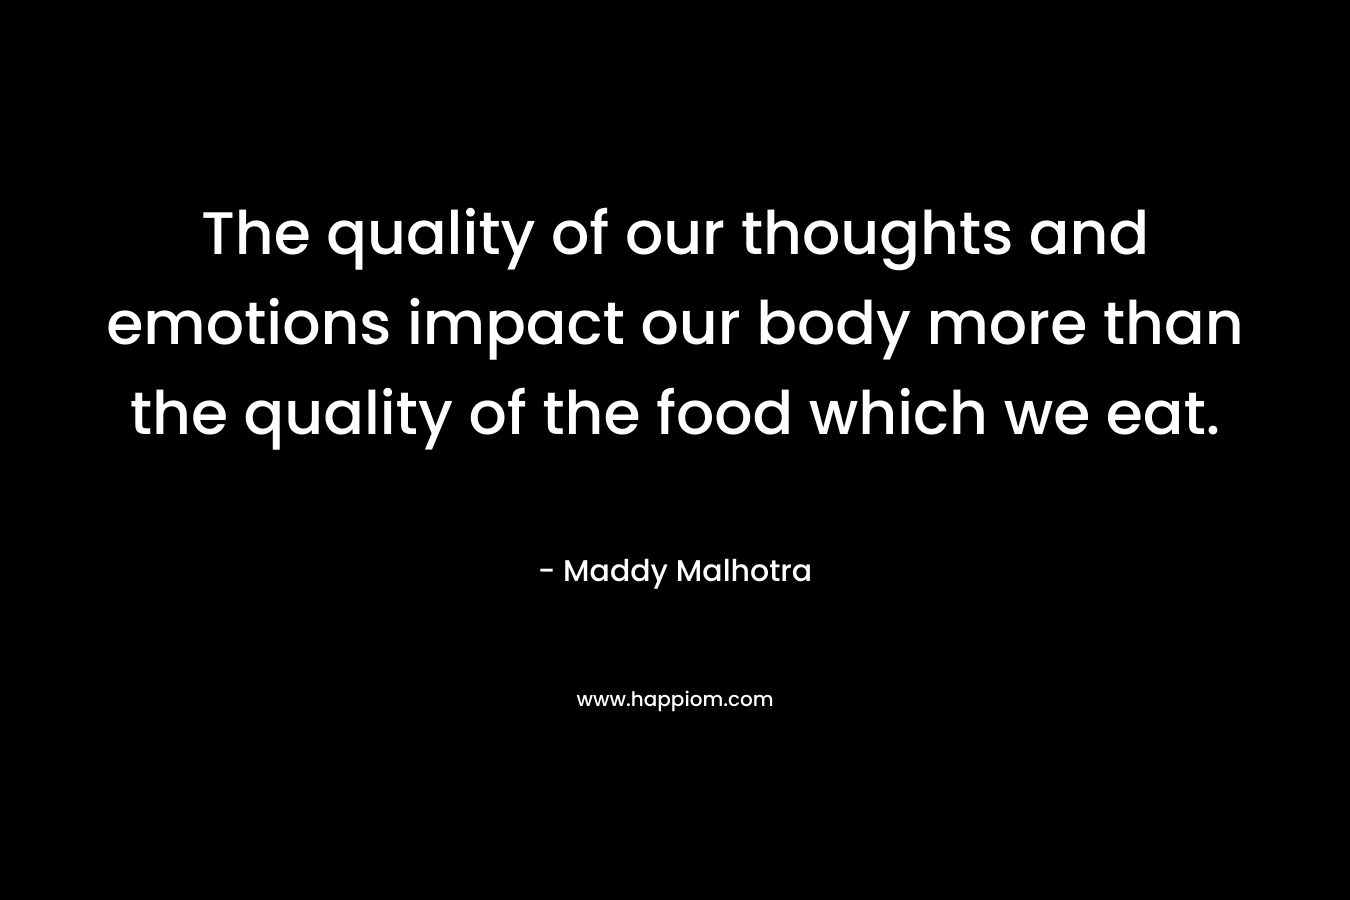 The quality of our thoughts and emotions impact our body more than the quality of the food which we eat.